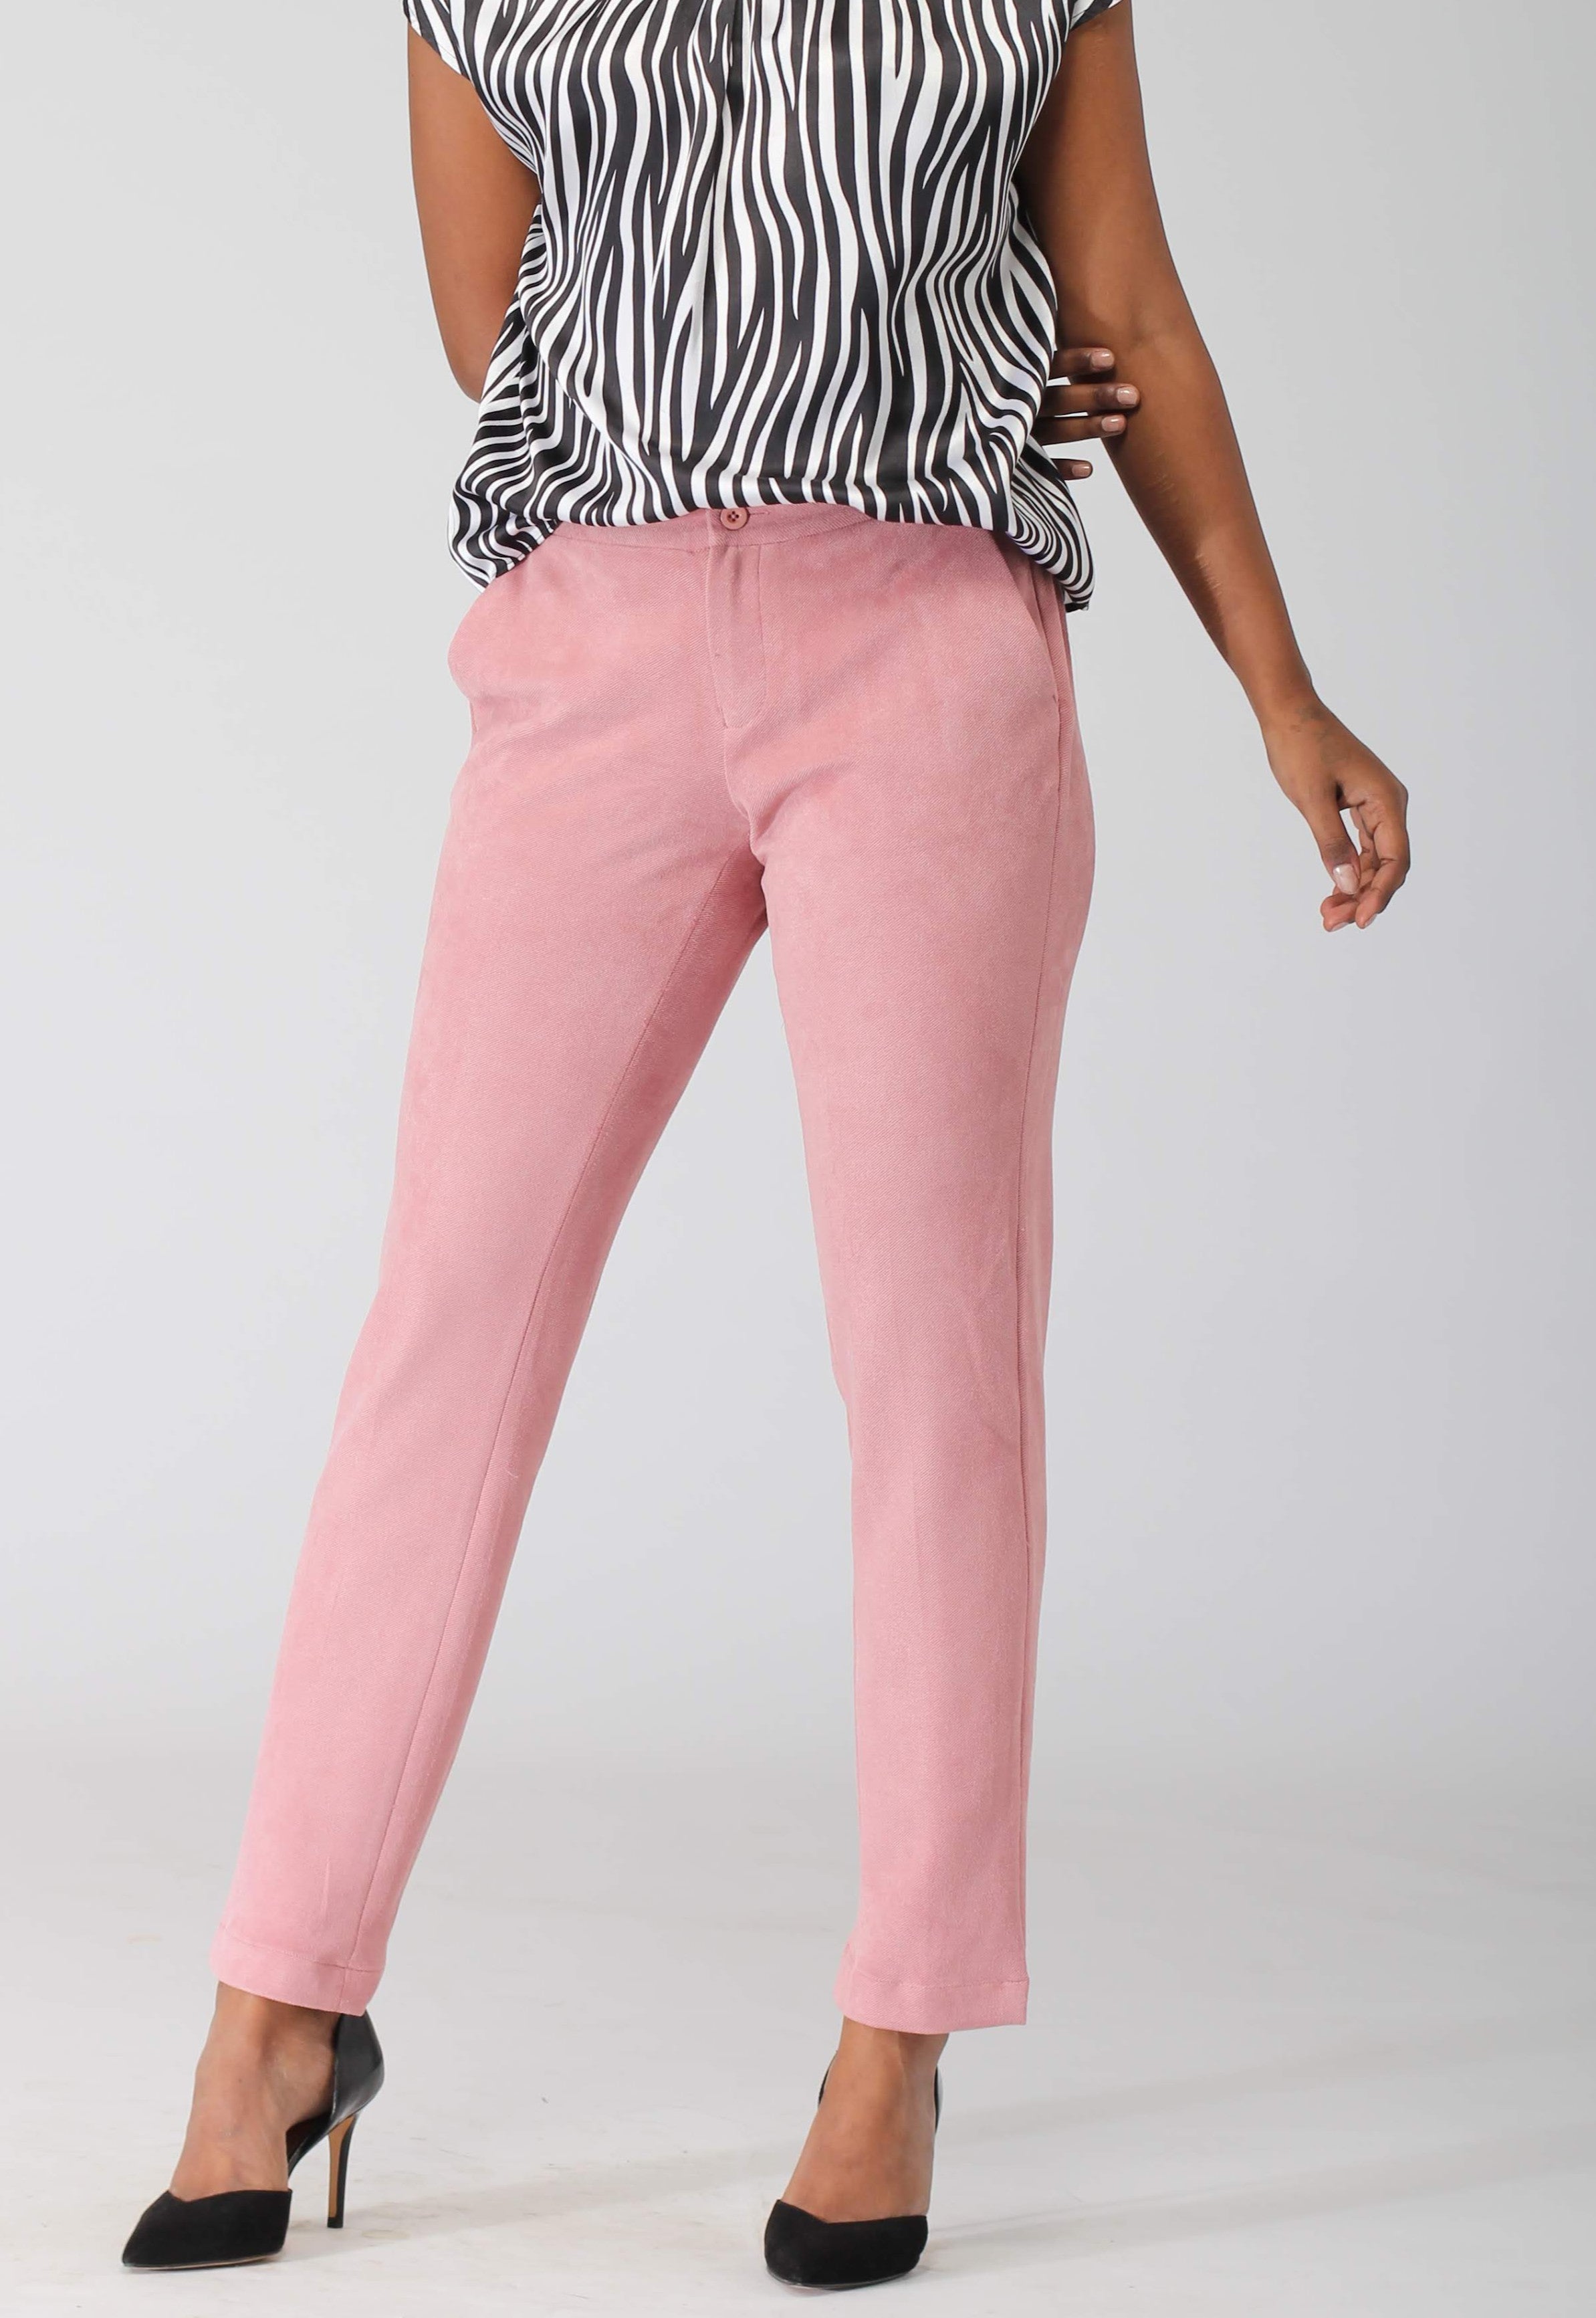 Wool Stretch Crêpe Straight Leg Pants with Side Seam Fringes